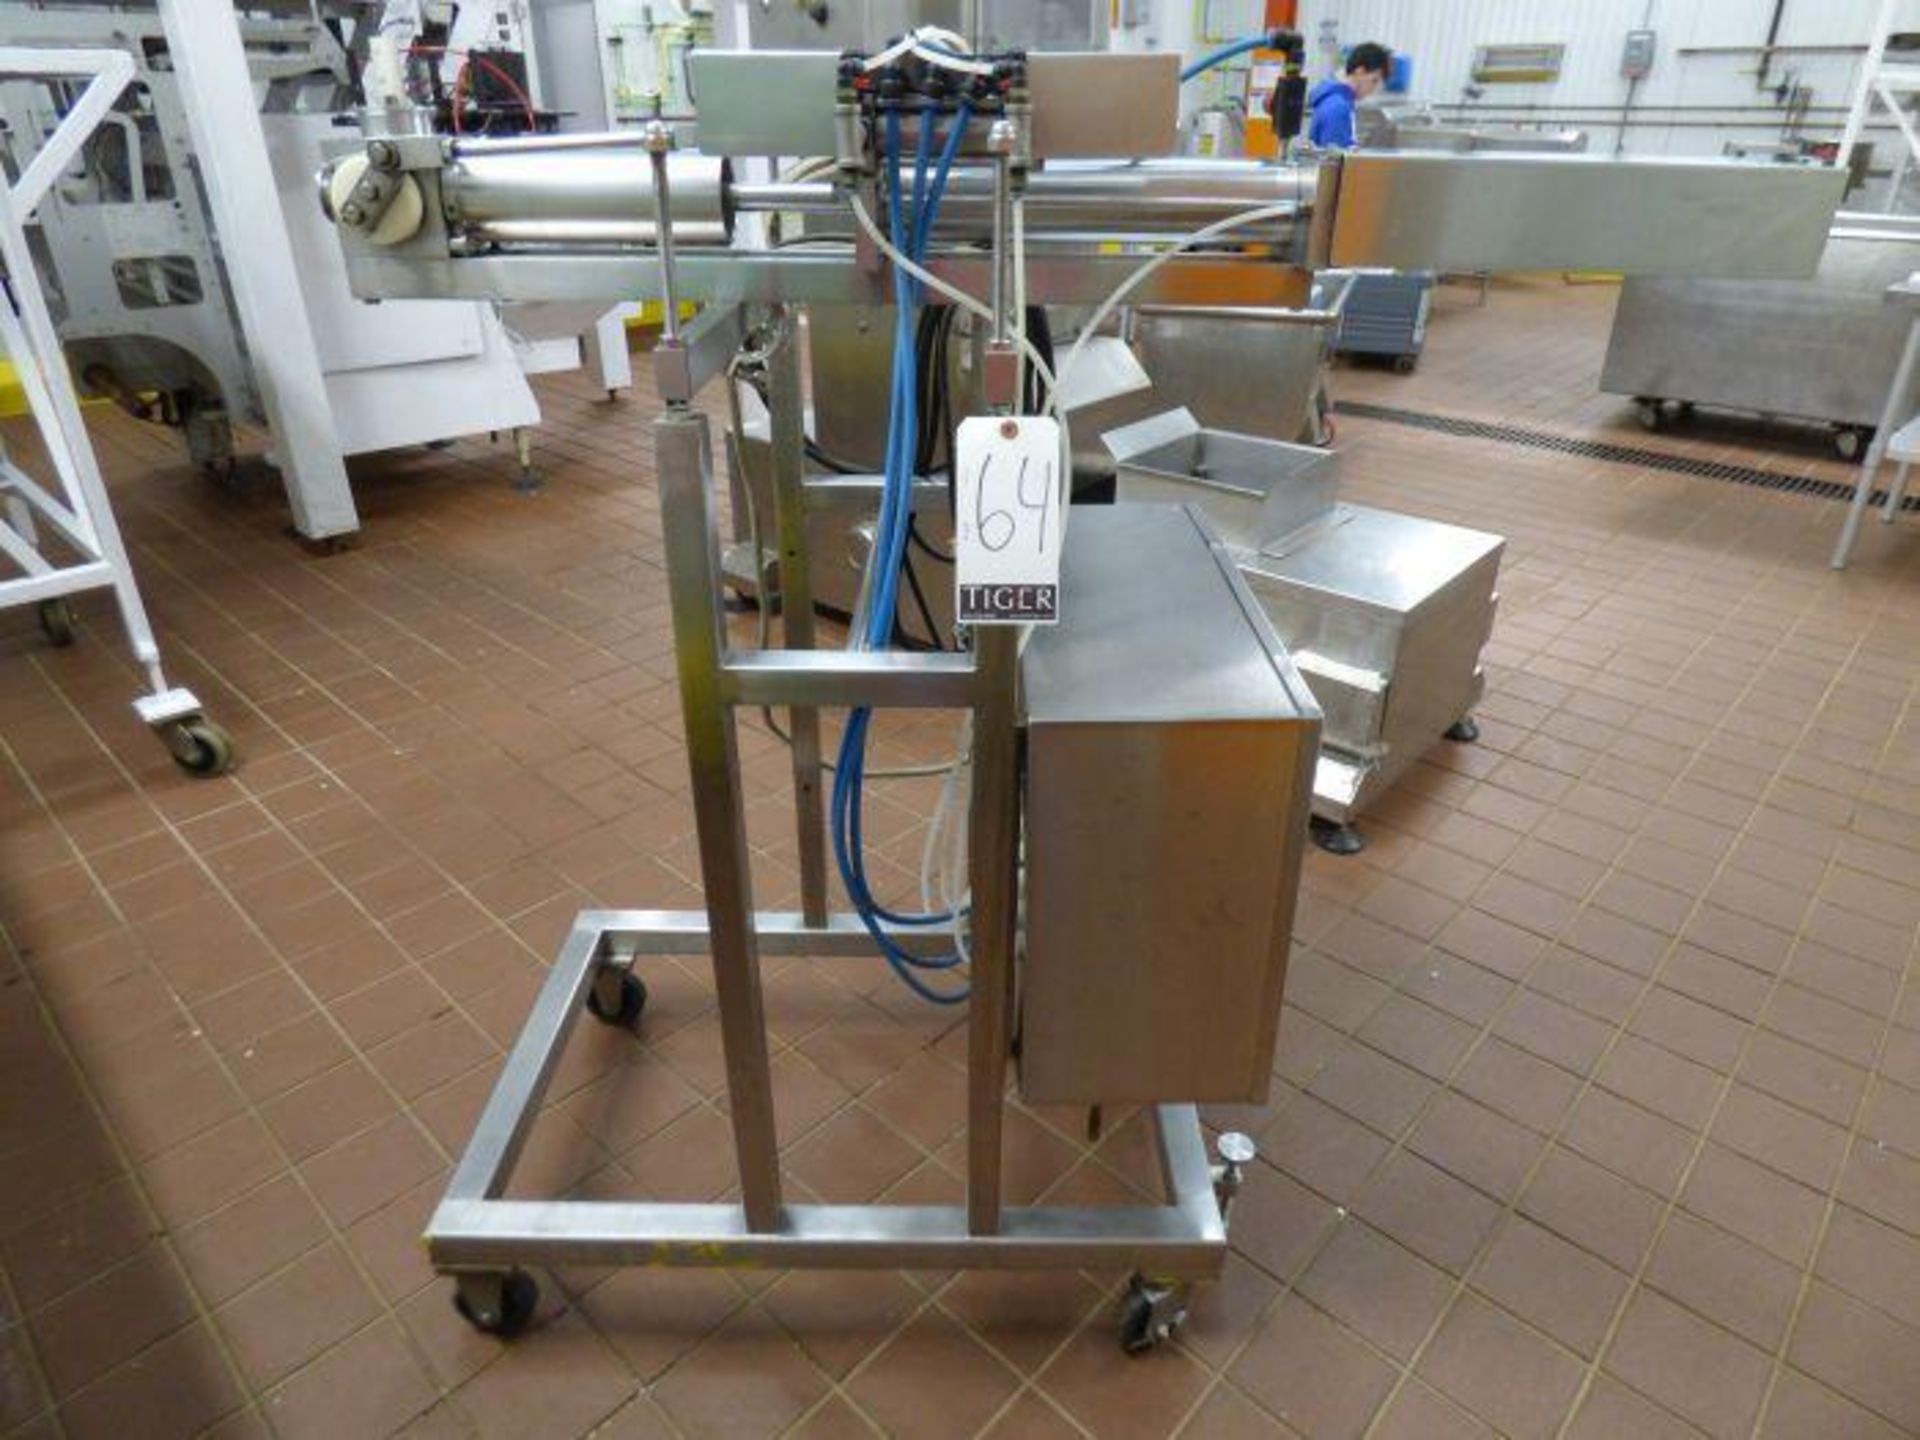 Microprocessor Controlled Form/Fill/Seal Packaging Line - Image 16 of 21